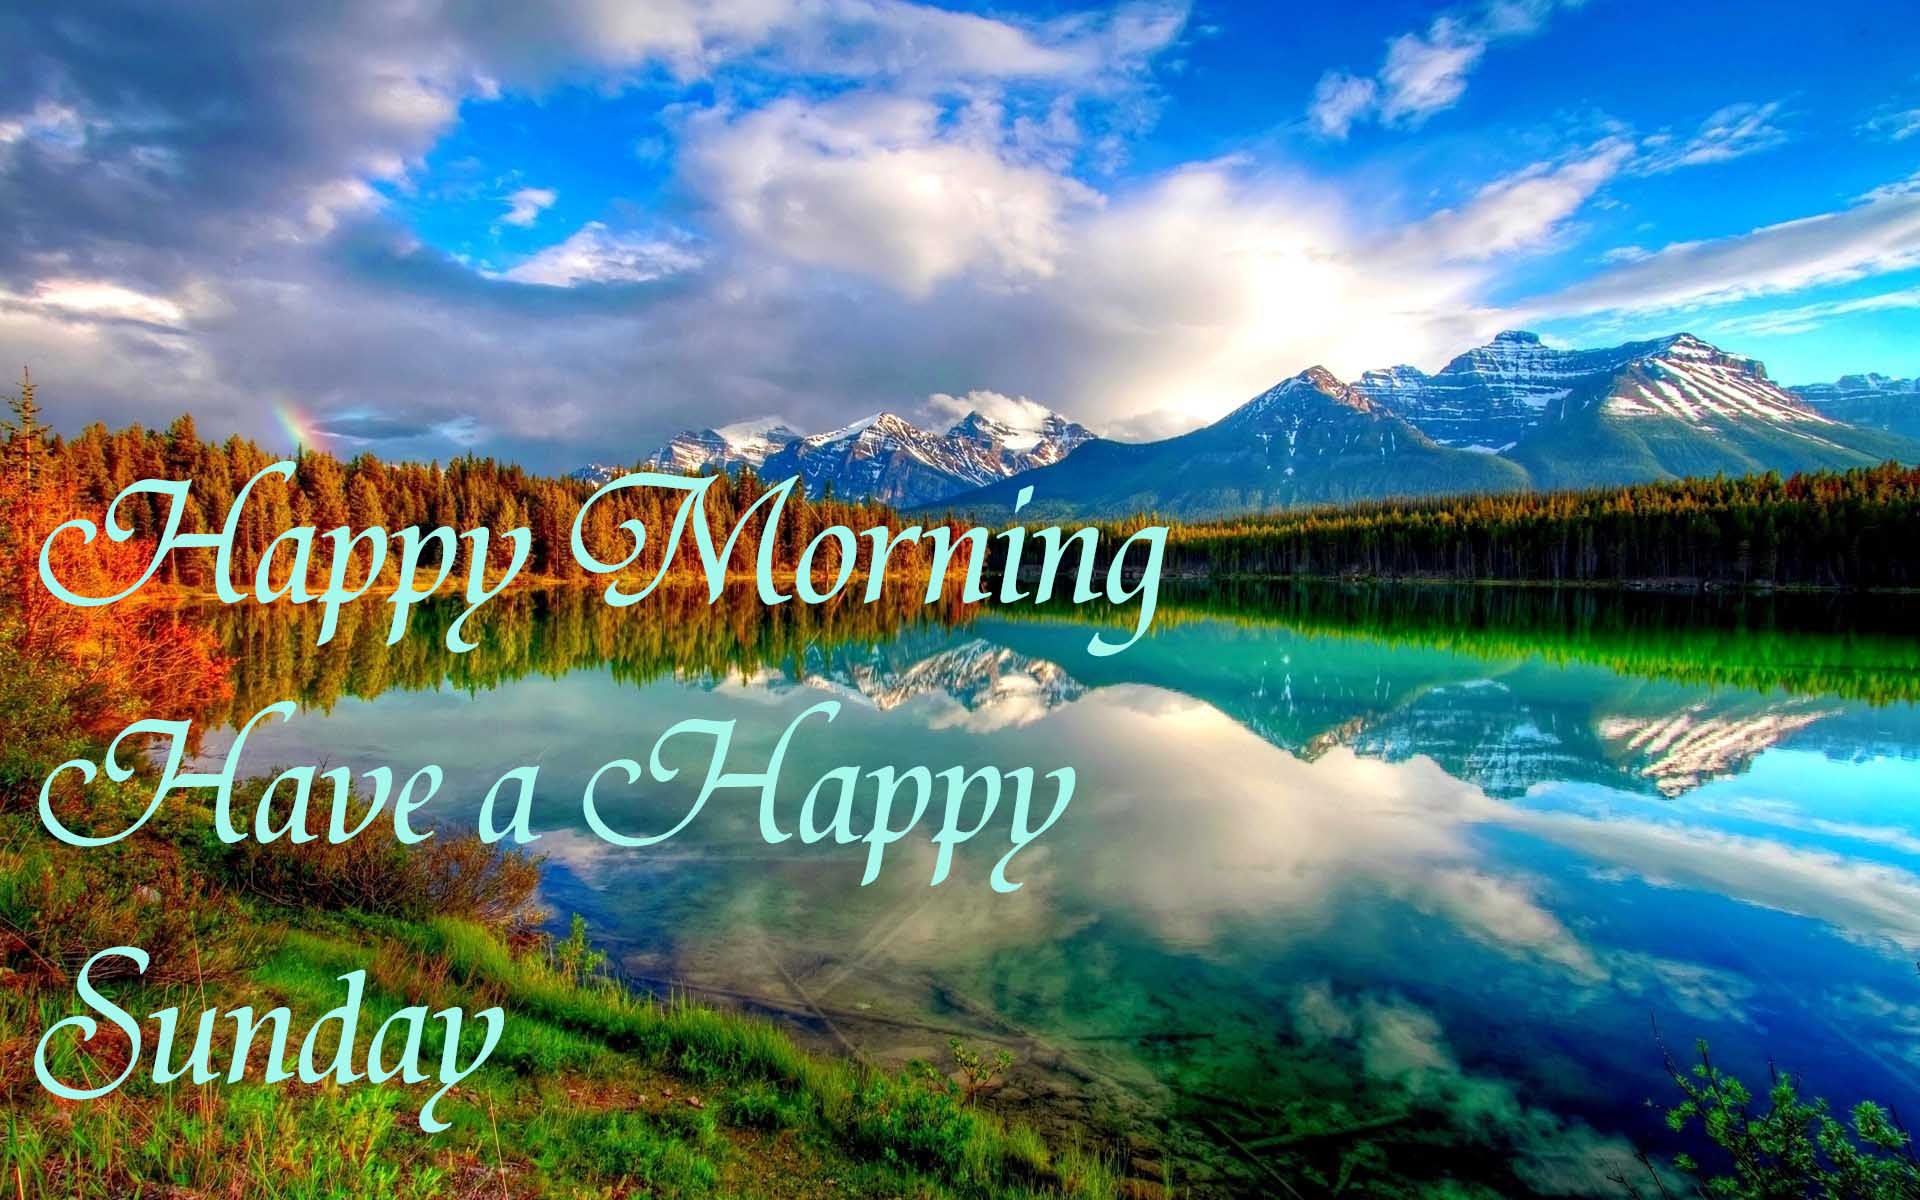  Wallpapers like that of good morning Sunday wishes wallpapers will